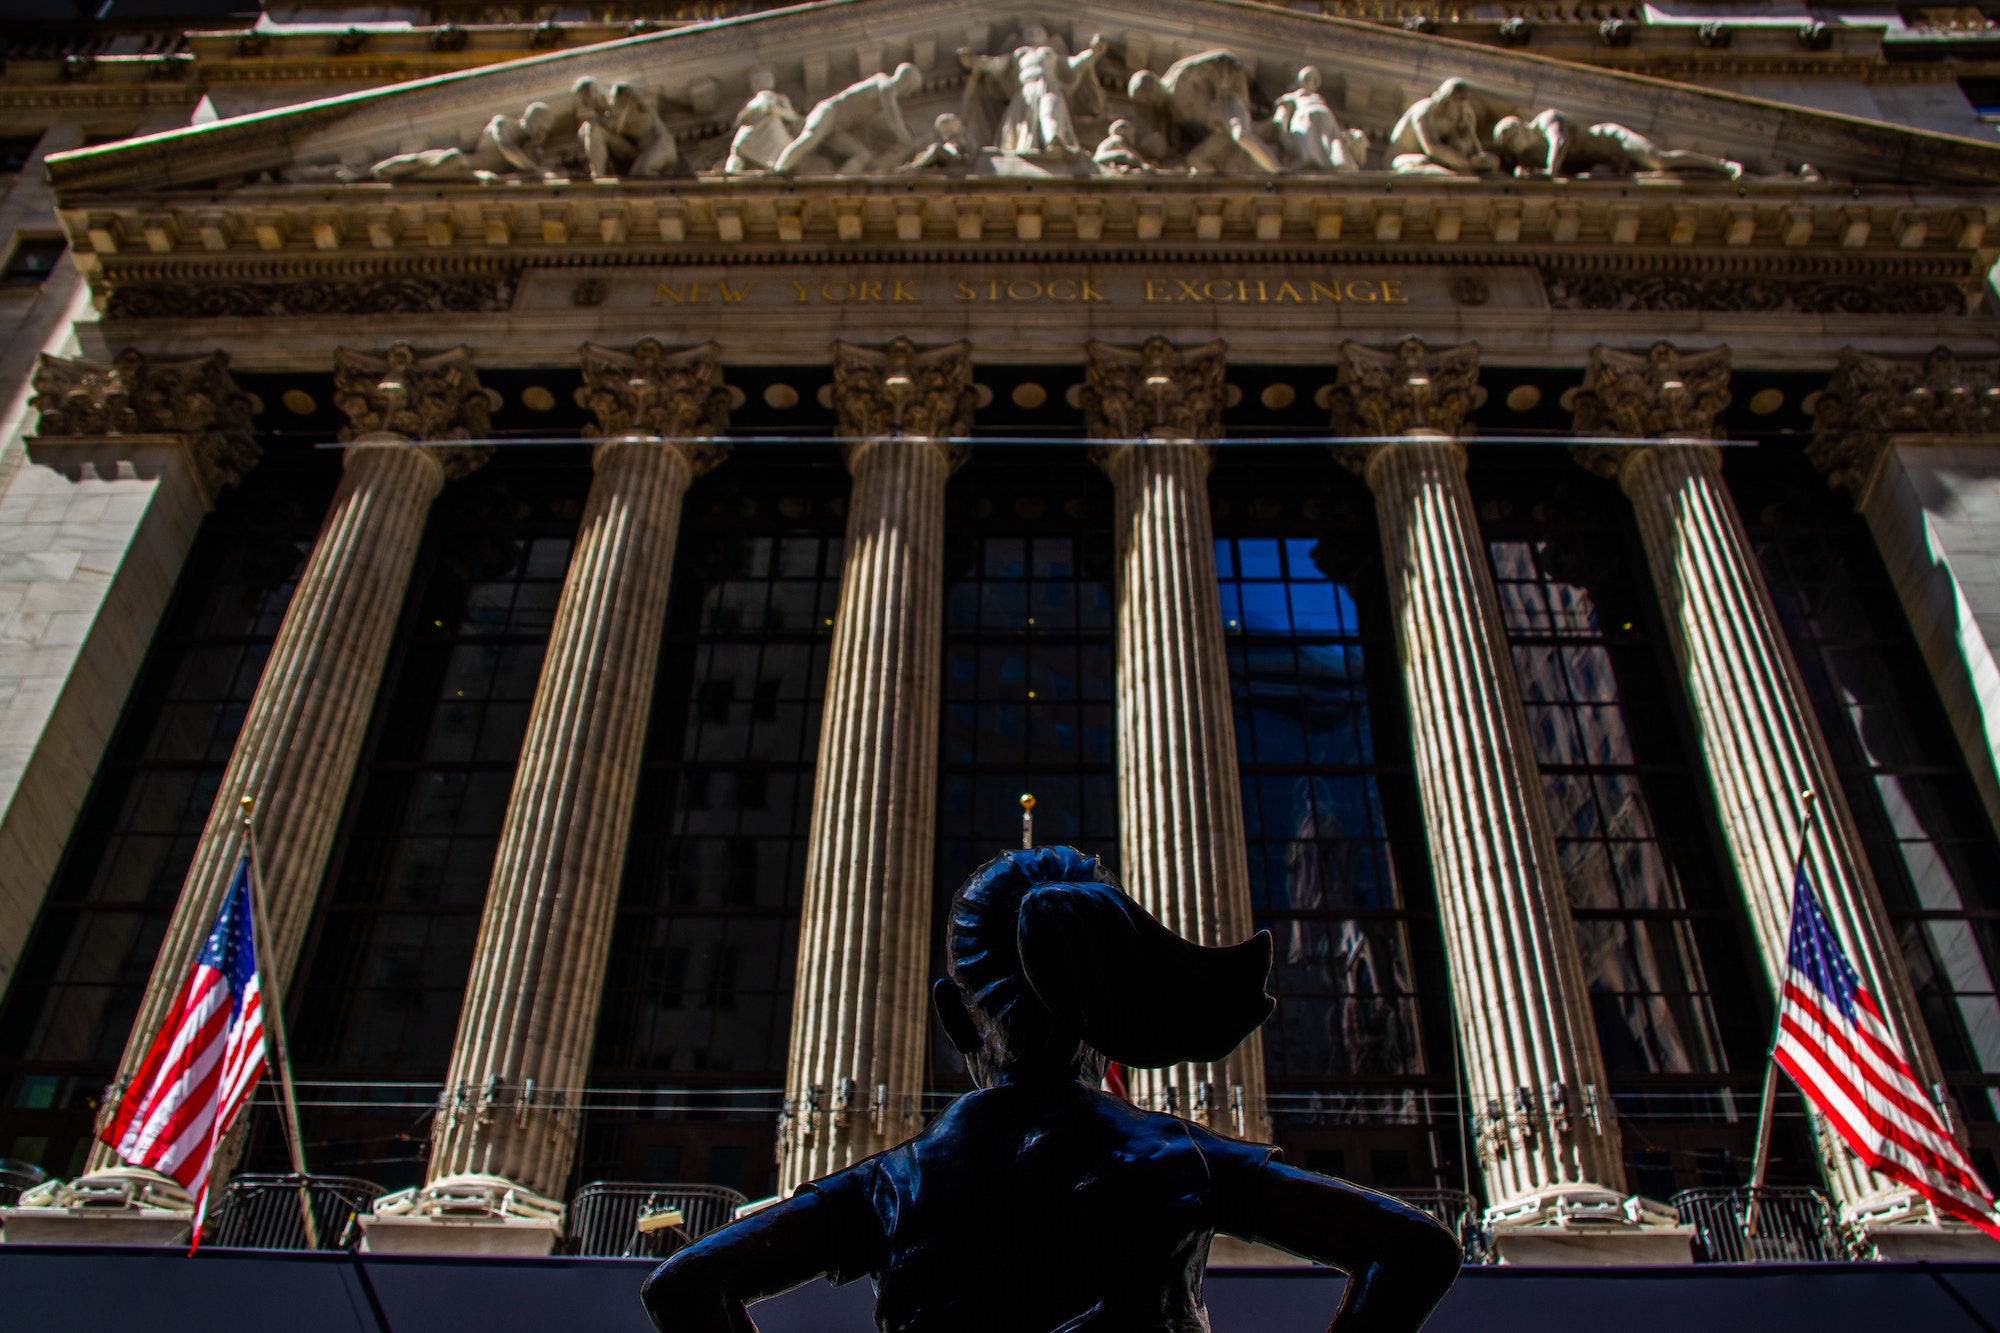 The New York Stock exchange, where Ray Dalio learned about trading stocks